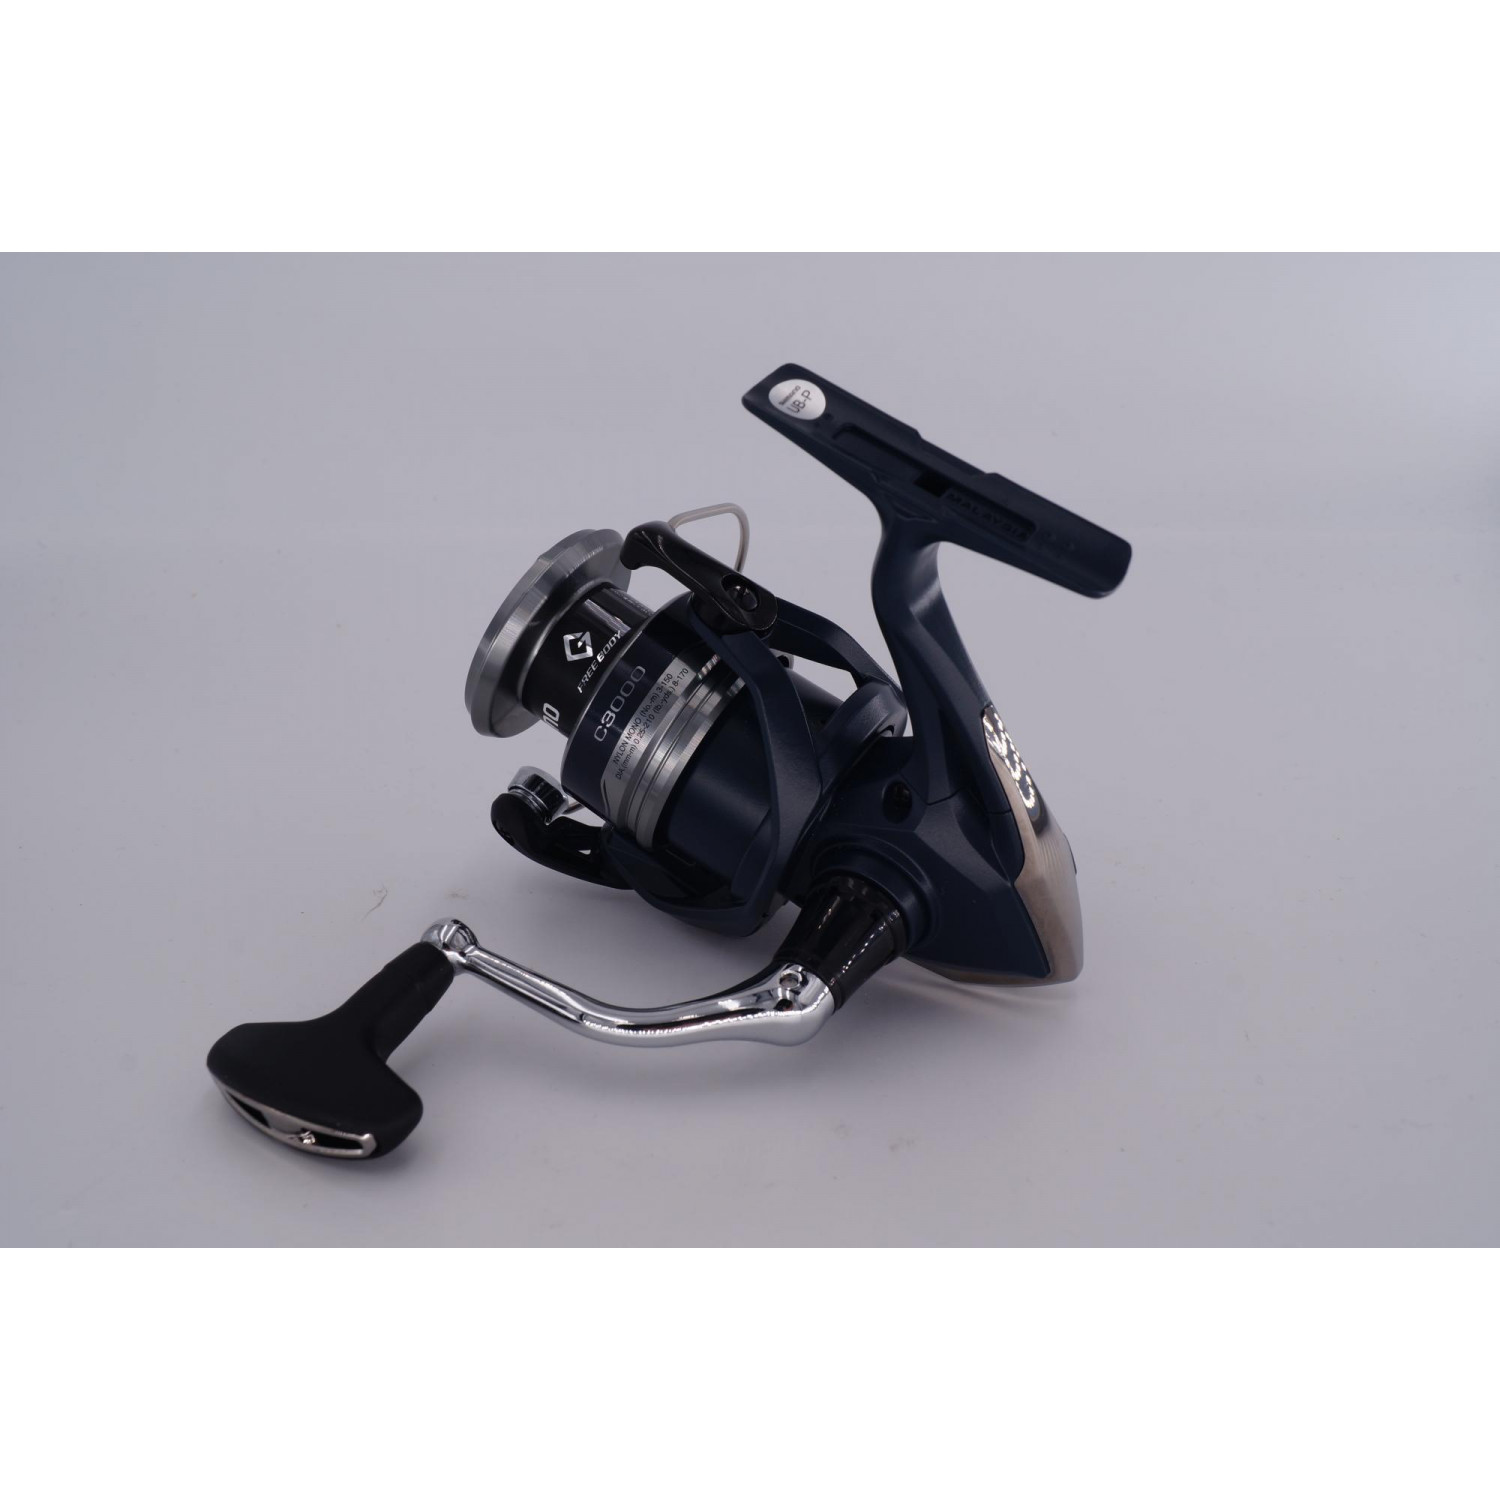 SHIMANO Catana FE, C 3000, left and right hand, Spinning Fishing Reel,  Front Drag, Packaging damaged